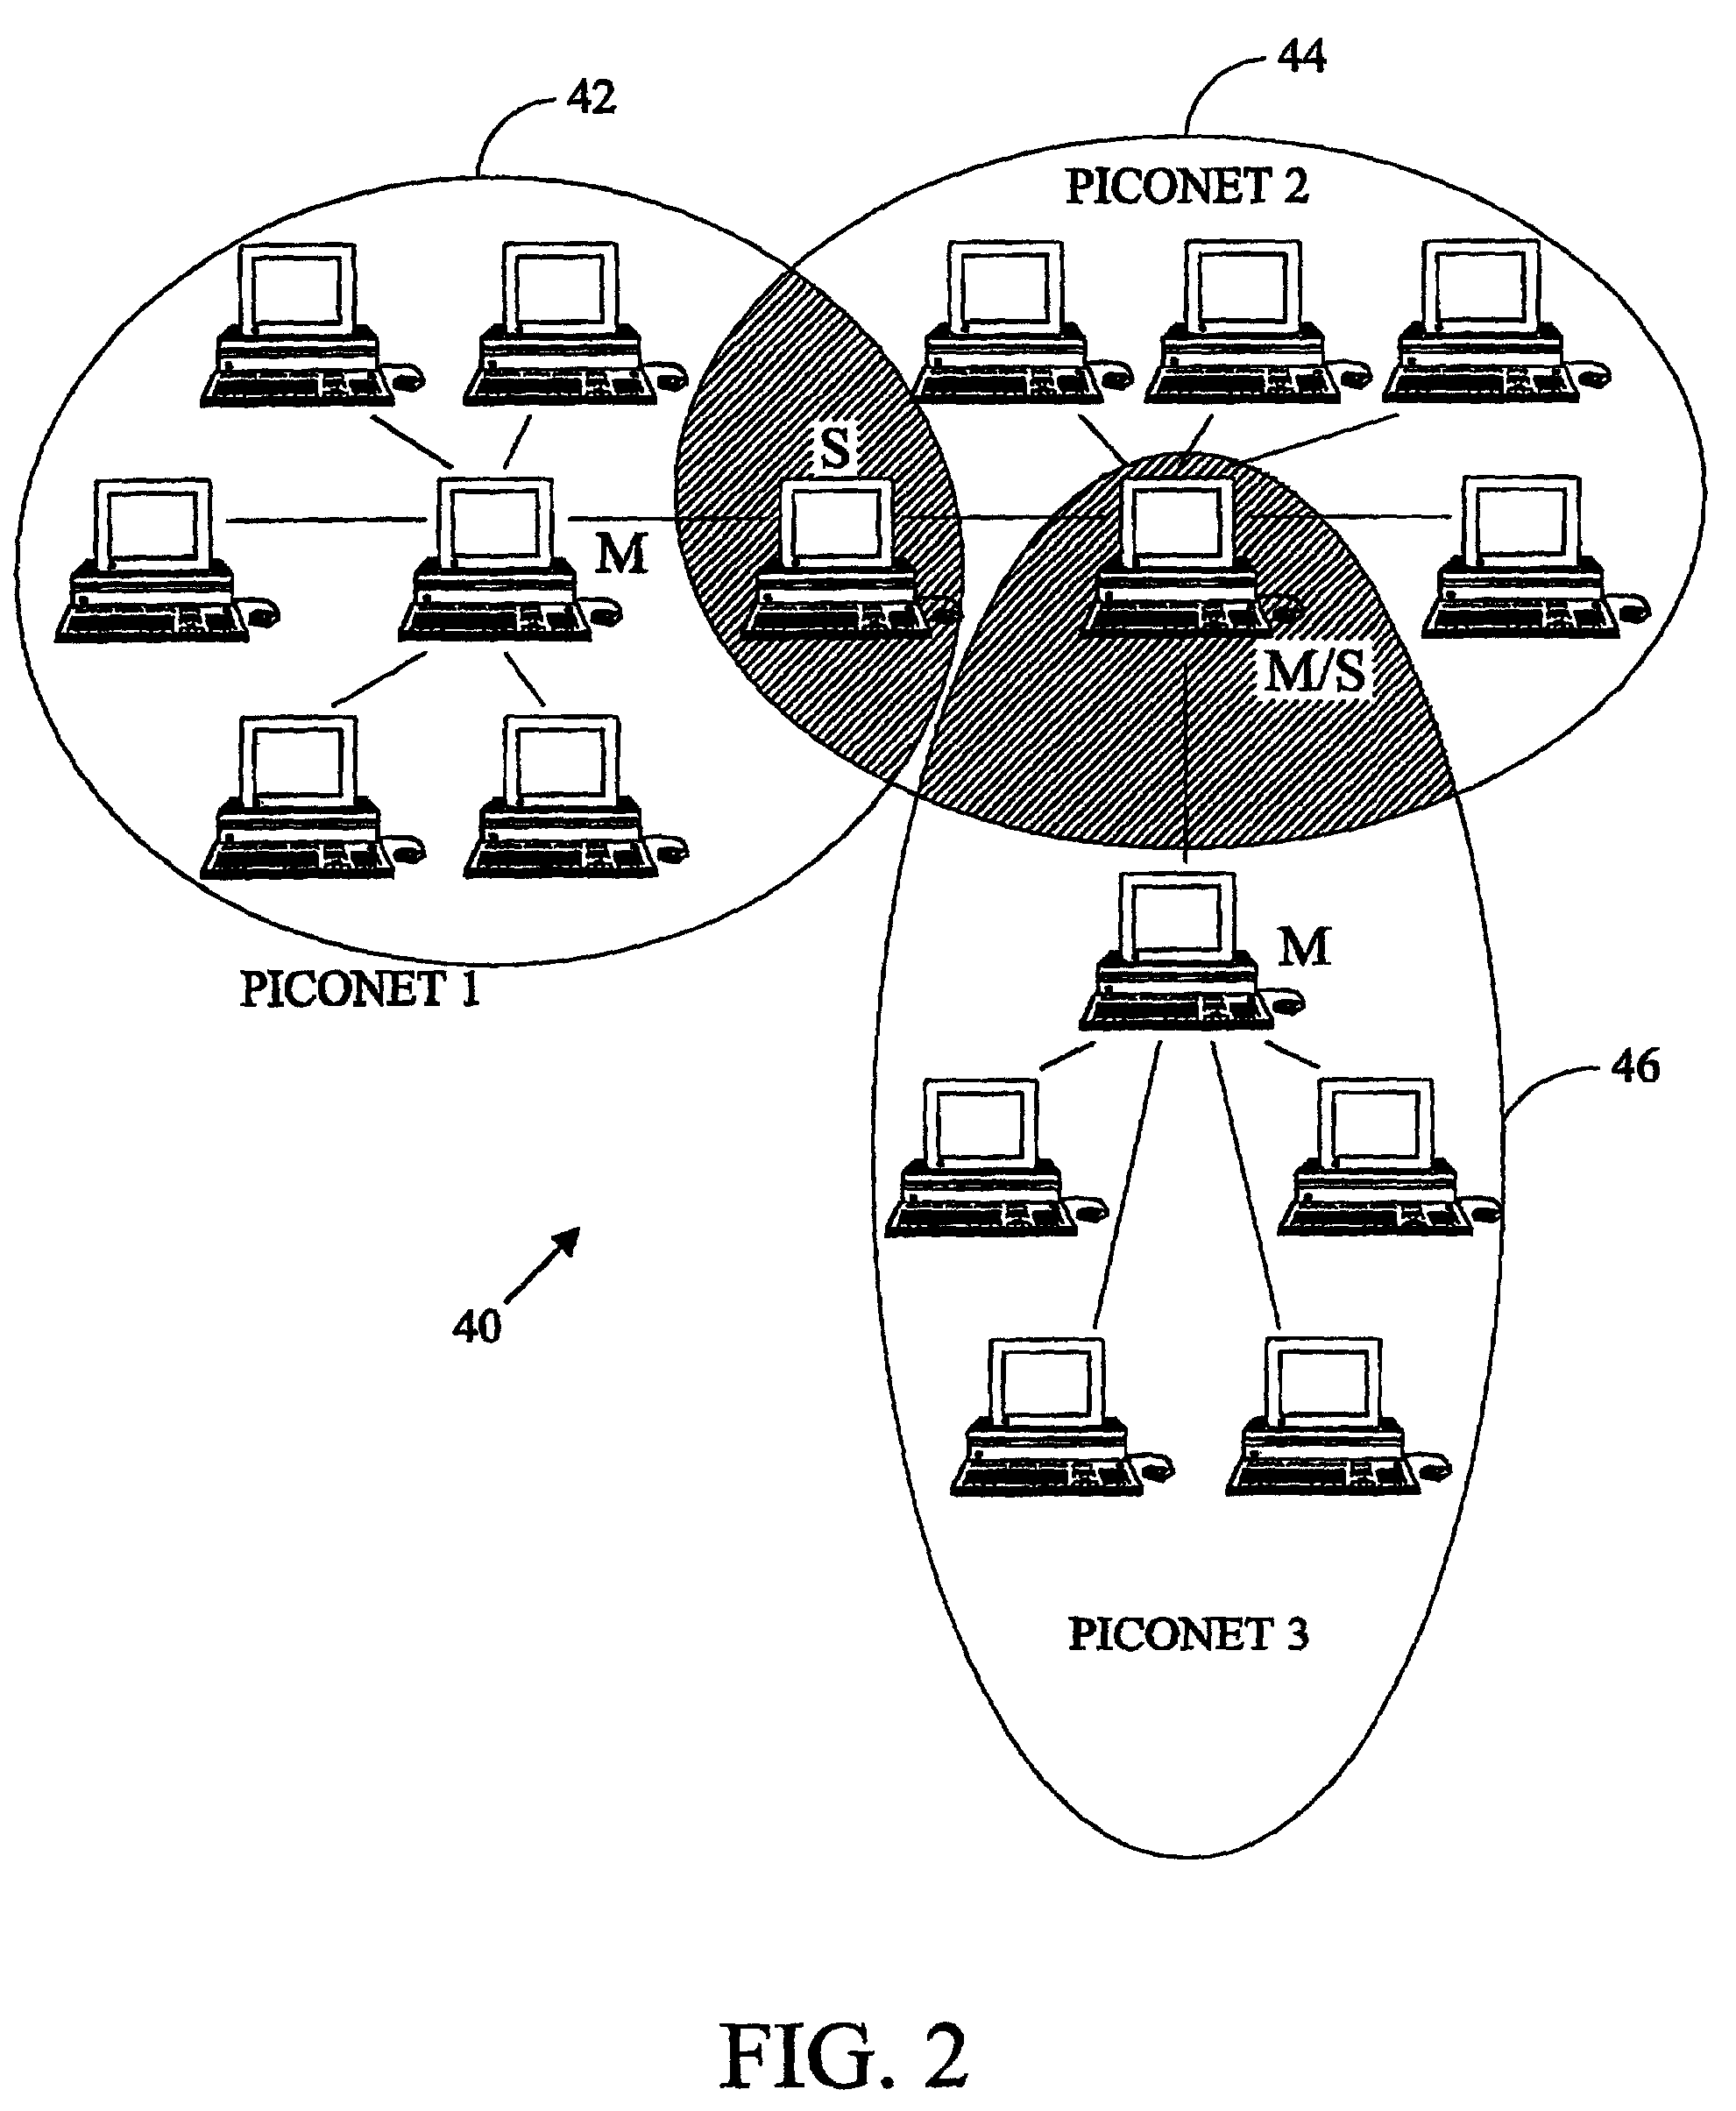 Object search and retrieval service for an ad hoc data communication system